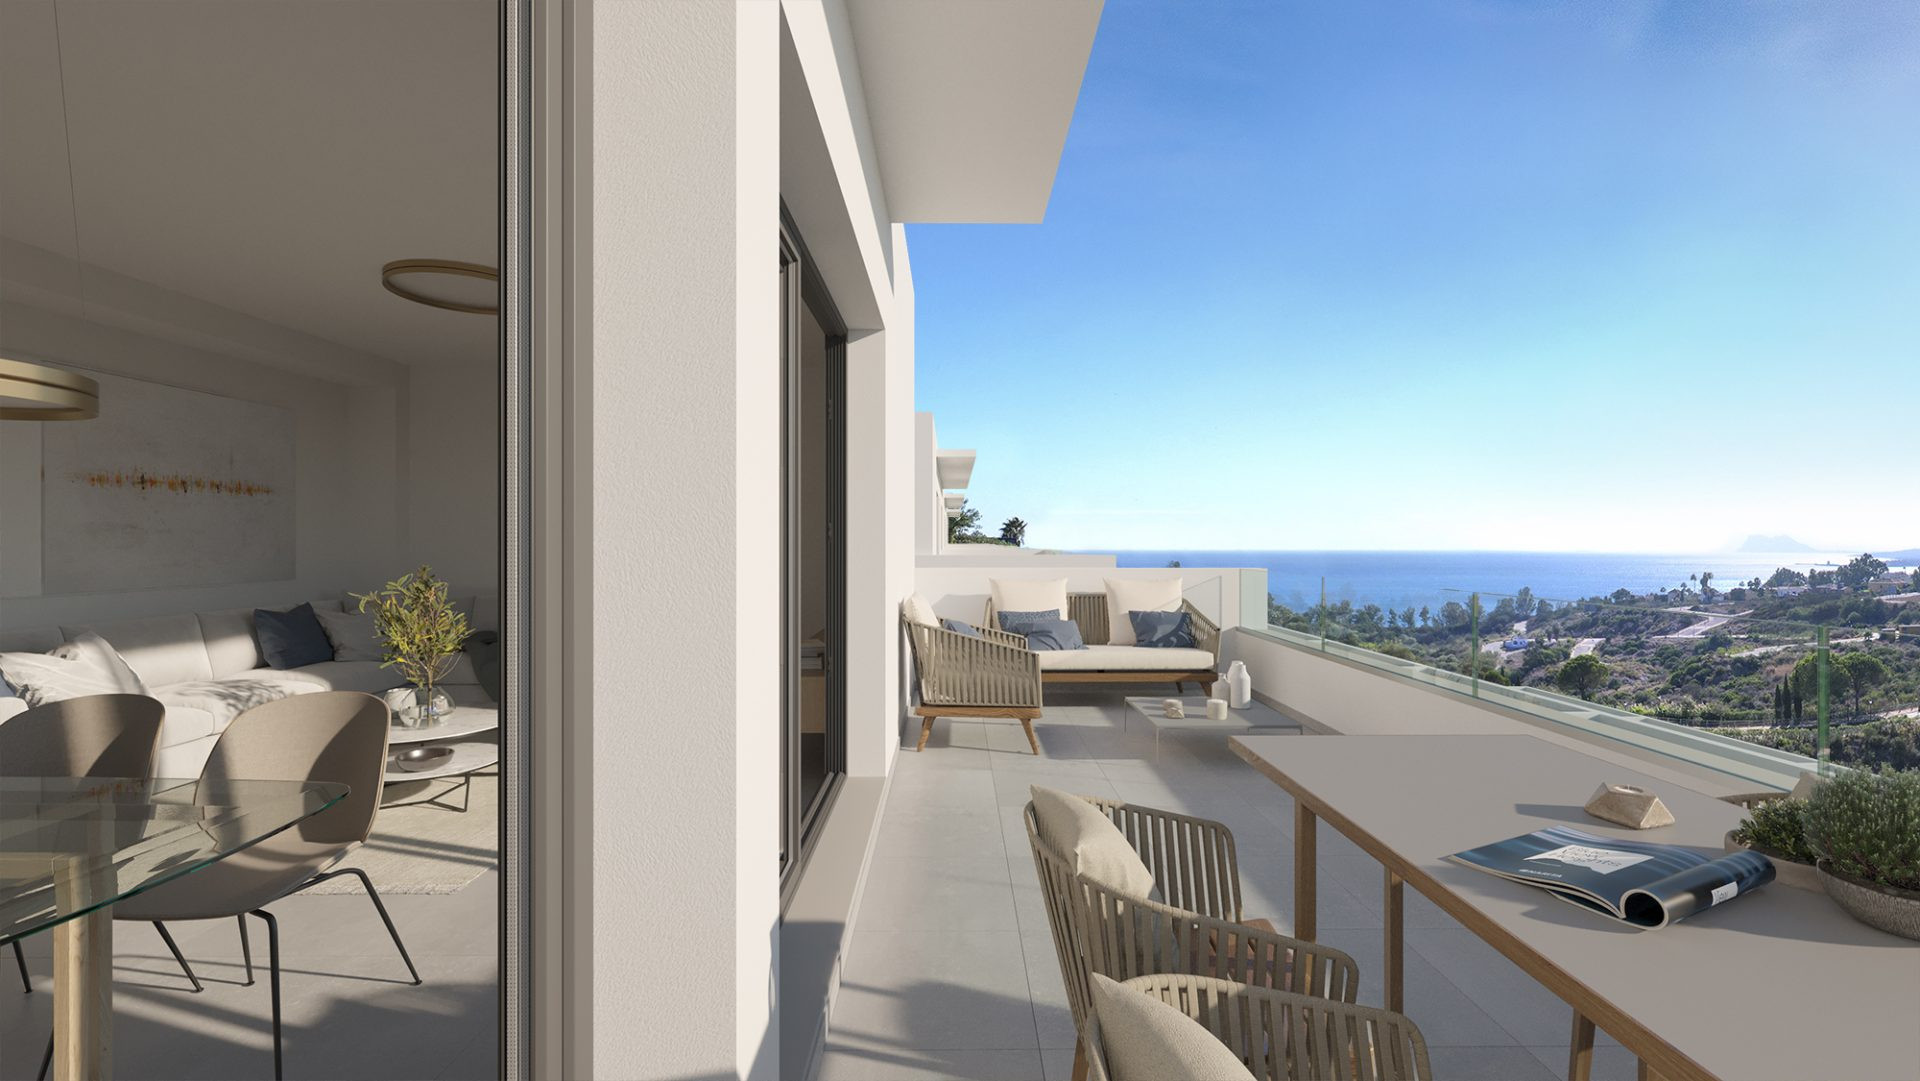 Brand new two bedroom townhouse with sea views in Manilva. | Image 1